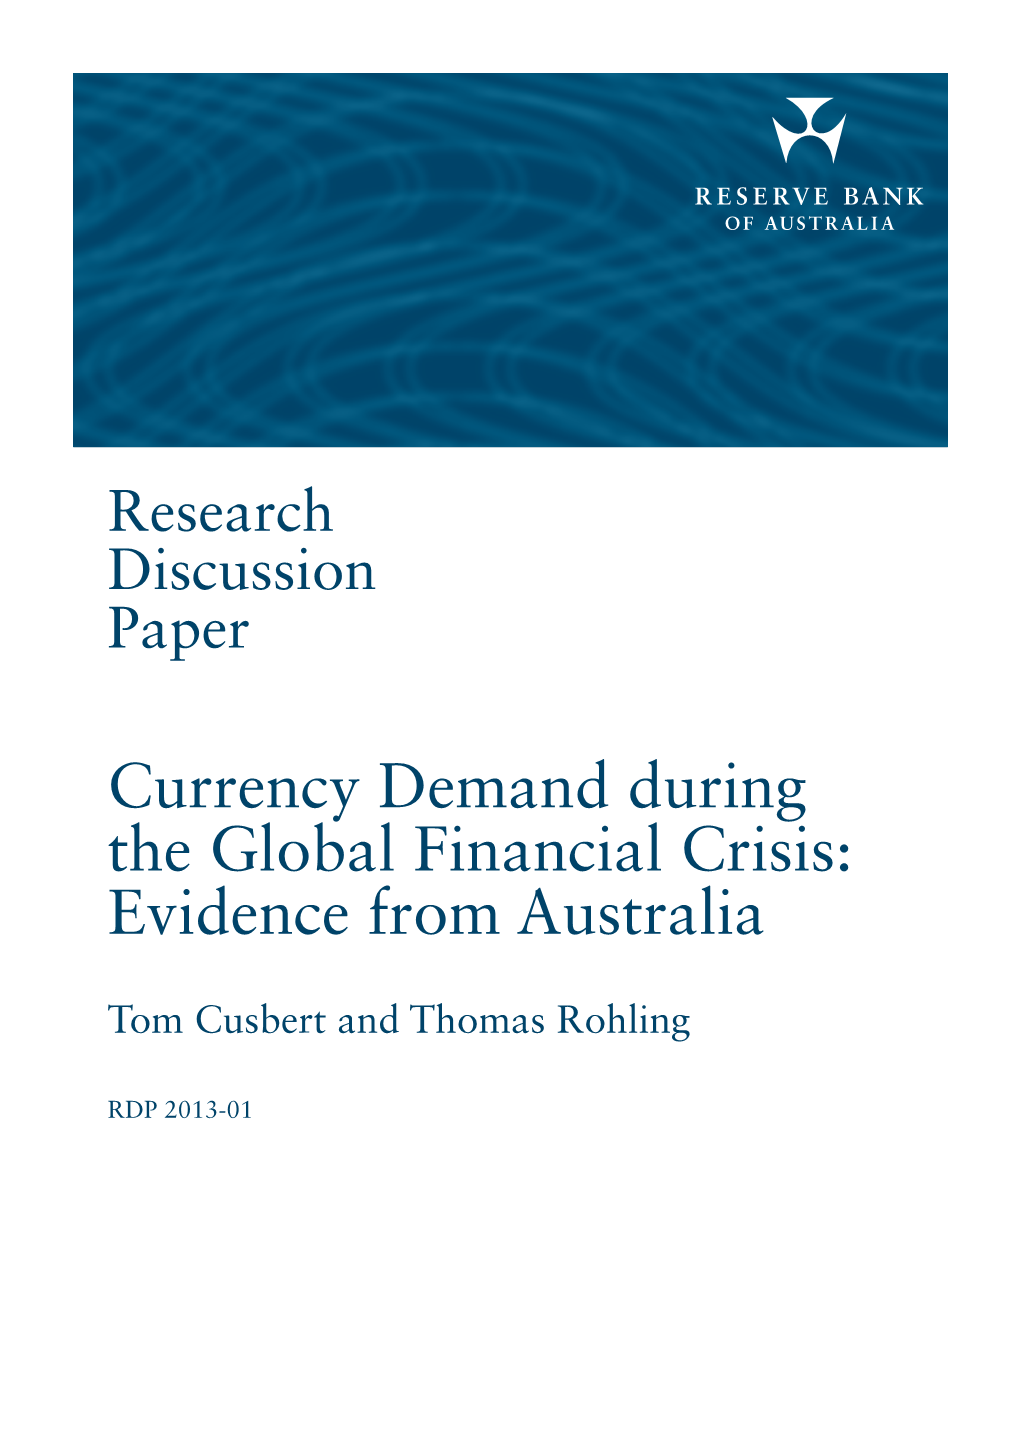 Currency Demand During the Global Financial Crisis: Evidence from Australia